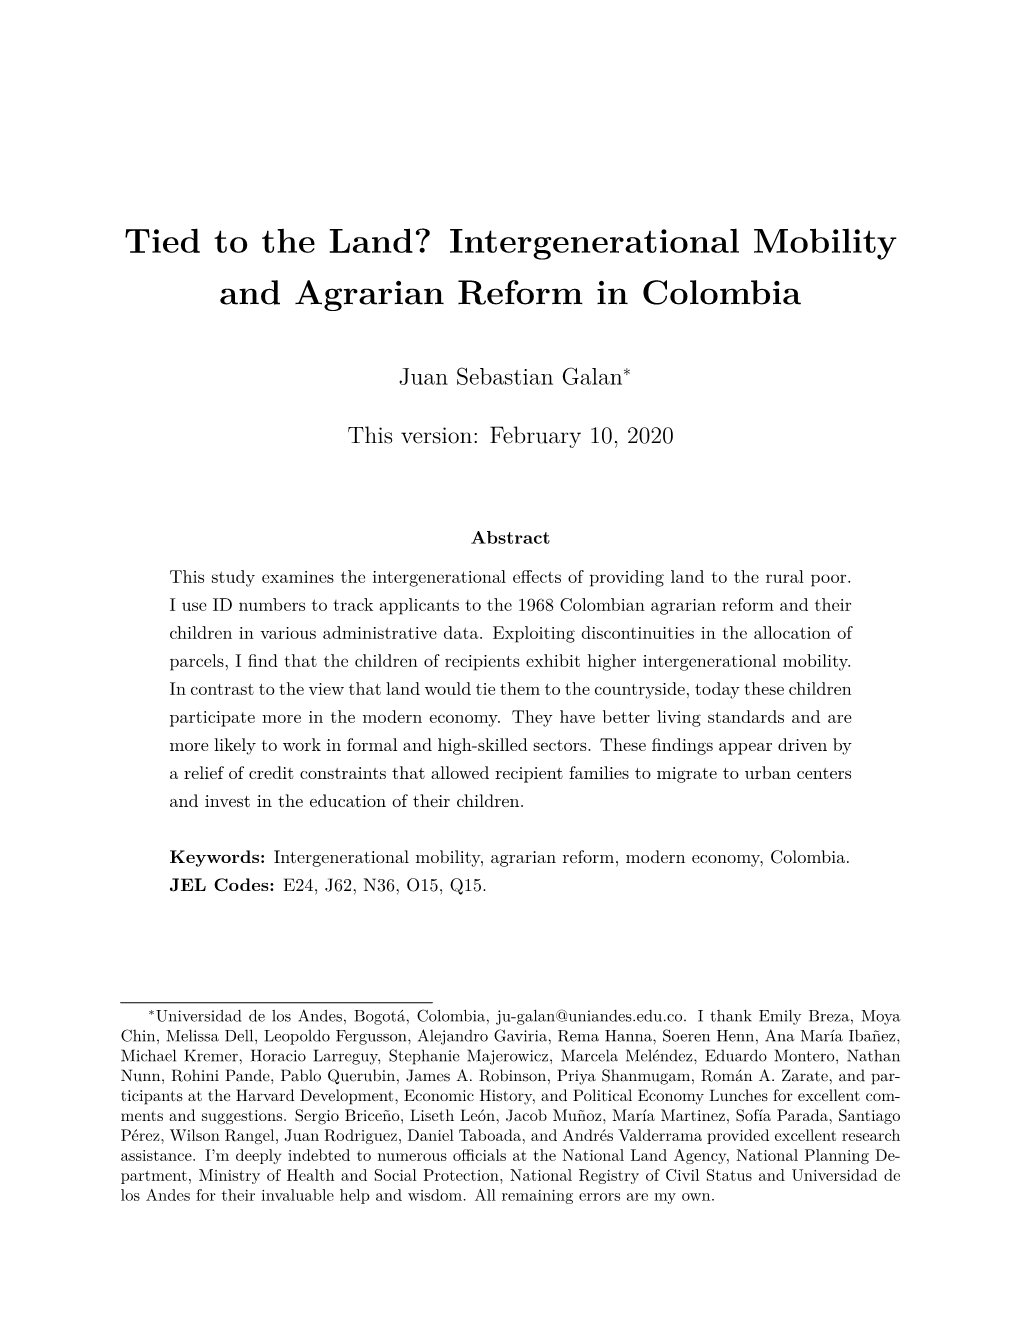 Intergenerational Mobility and Agrarian Reform in Colombia